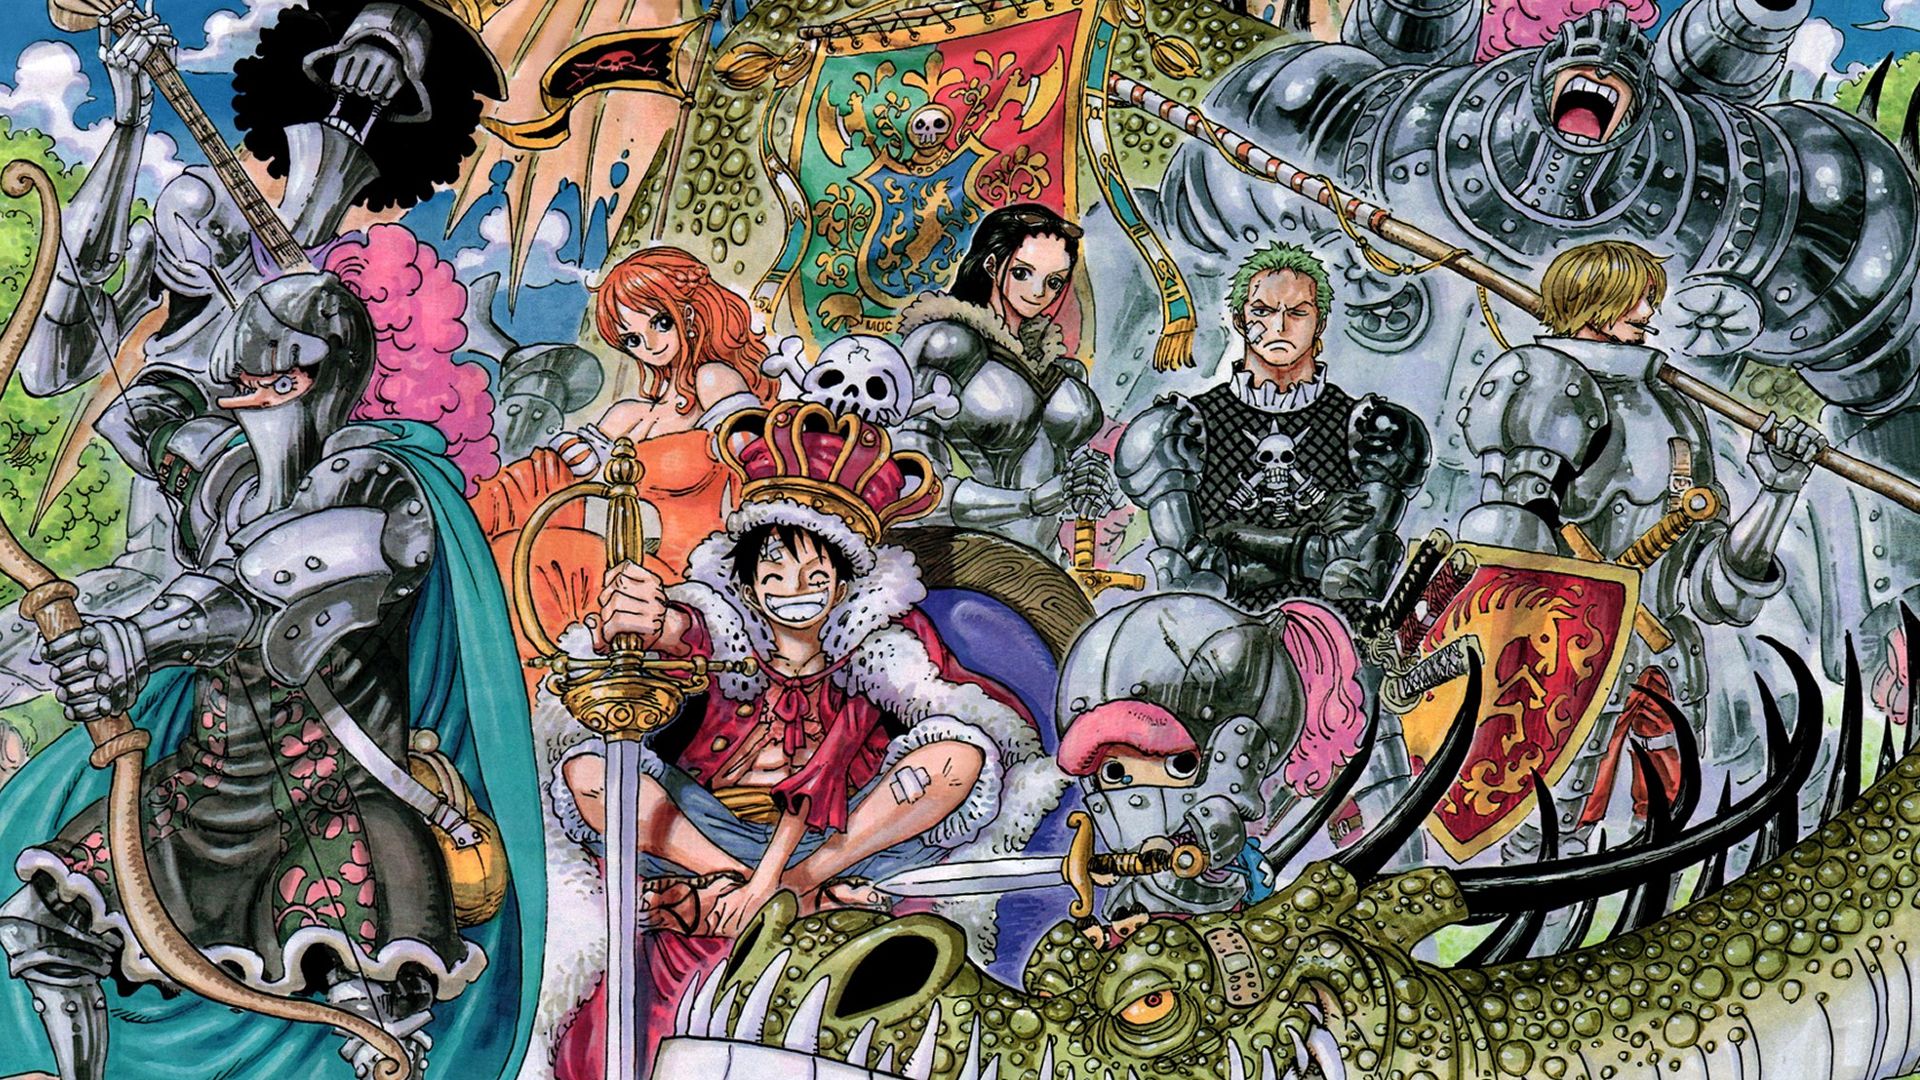 62+ One Piece Wallpapers: HD, 4K, 5K for PC and Mobile